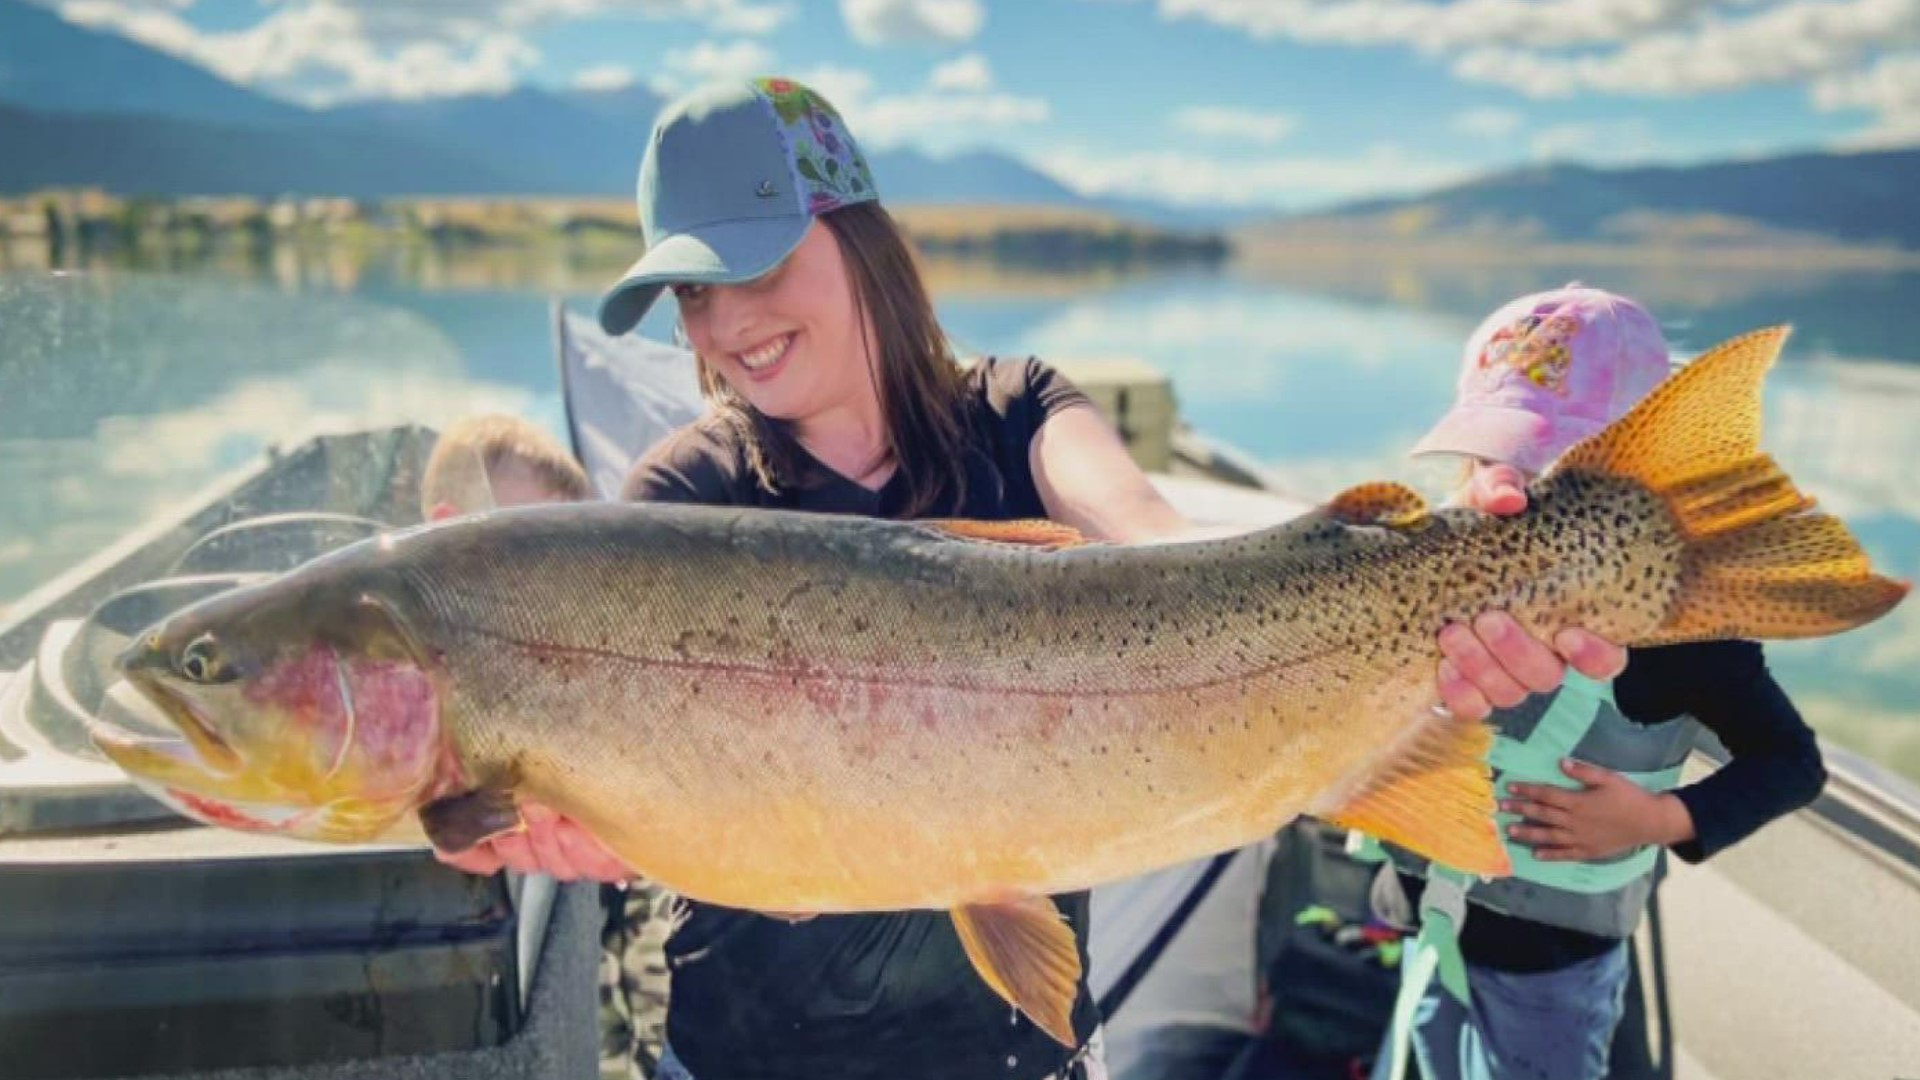 Hailey Thomas reeled in the 36-inch monster rainbow/cutthroat trout hybrid while fishing at Henrys Lake on Oct. 4.